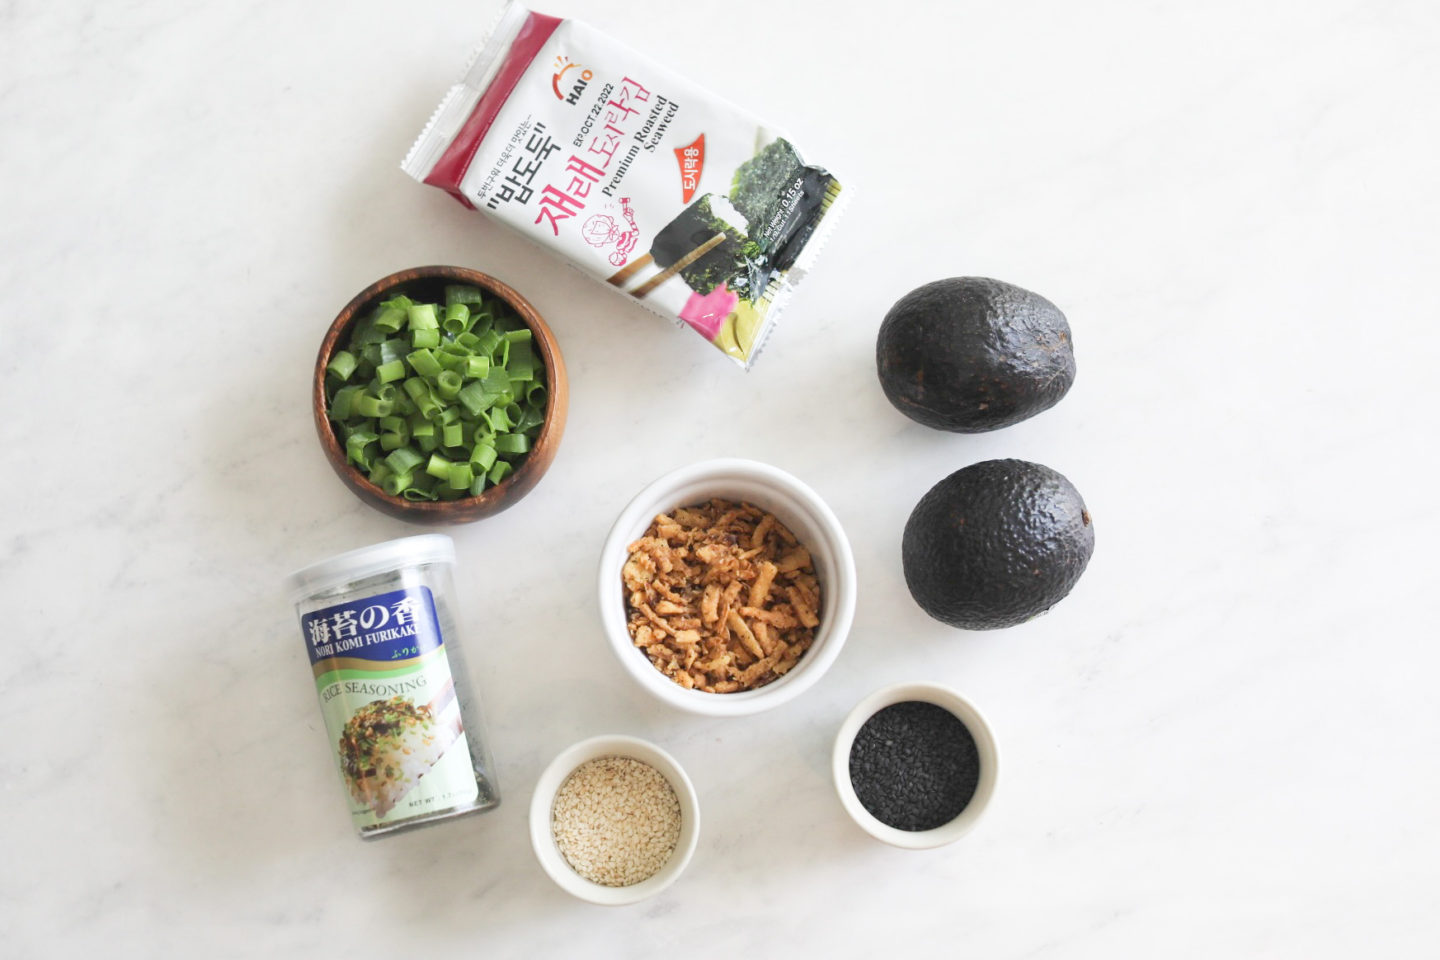 Additional toppings for sushi bake with additional toppings. From left to right in a flat lay style, seaweed sheets packaged, wooden bowl of green onions, bottled furikake, small white bowl with sesame seeds, small white bowl with fried green onions, small white bowl with black sesame seeds and two avocados.